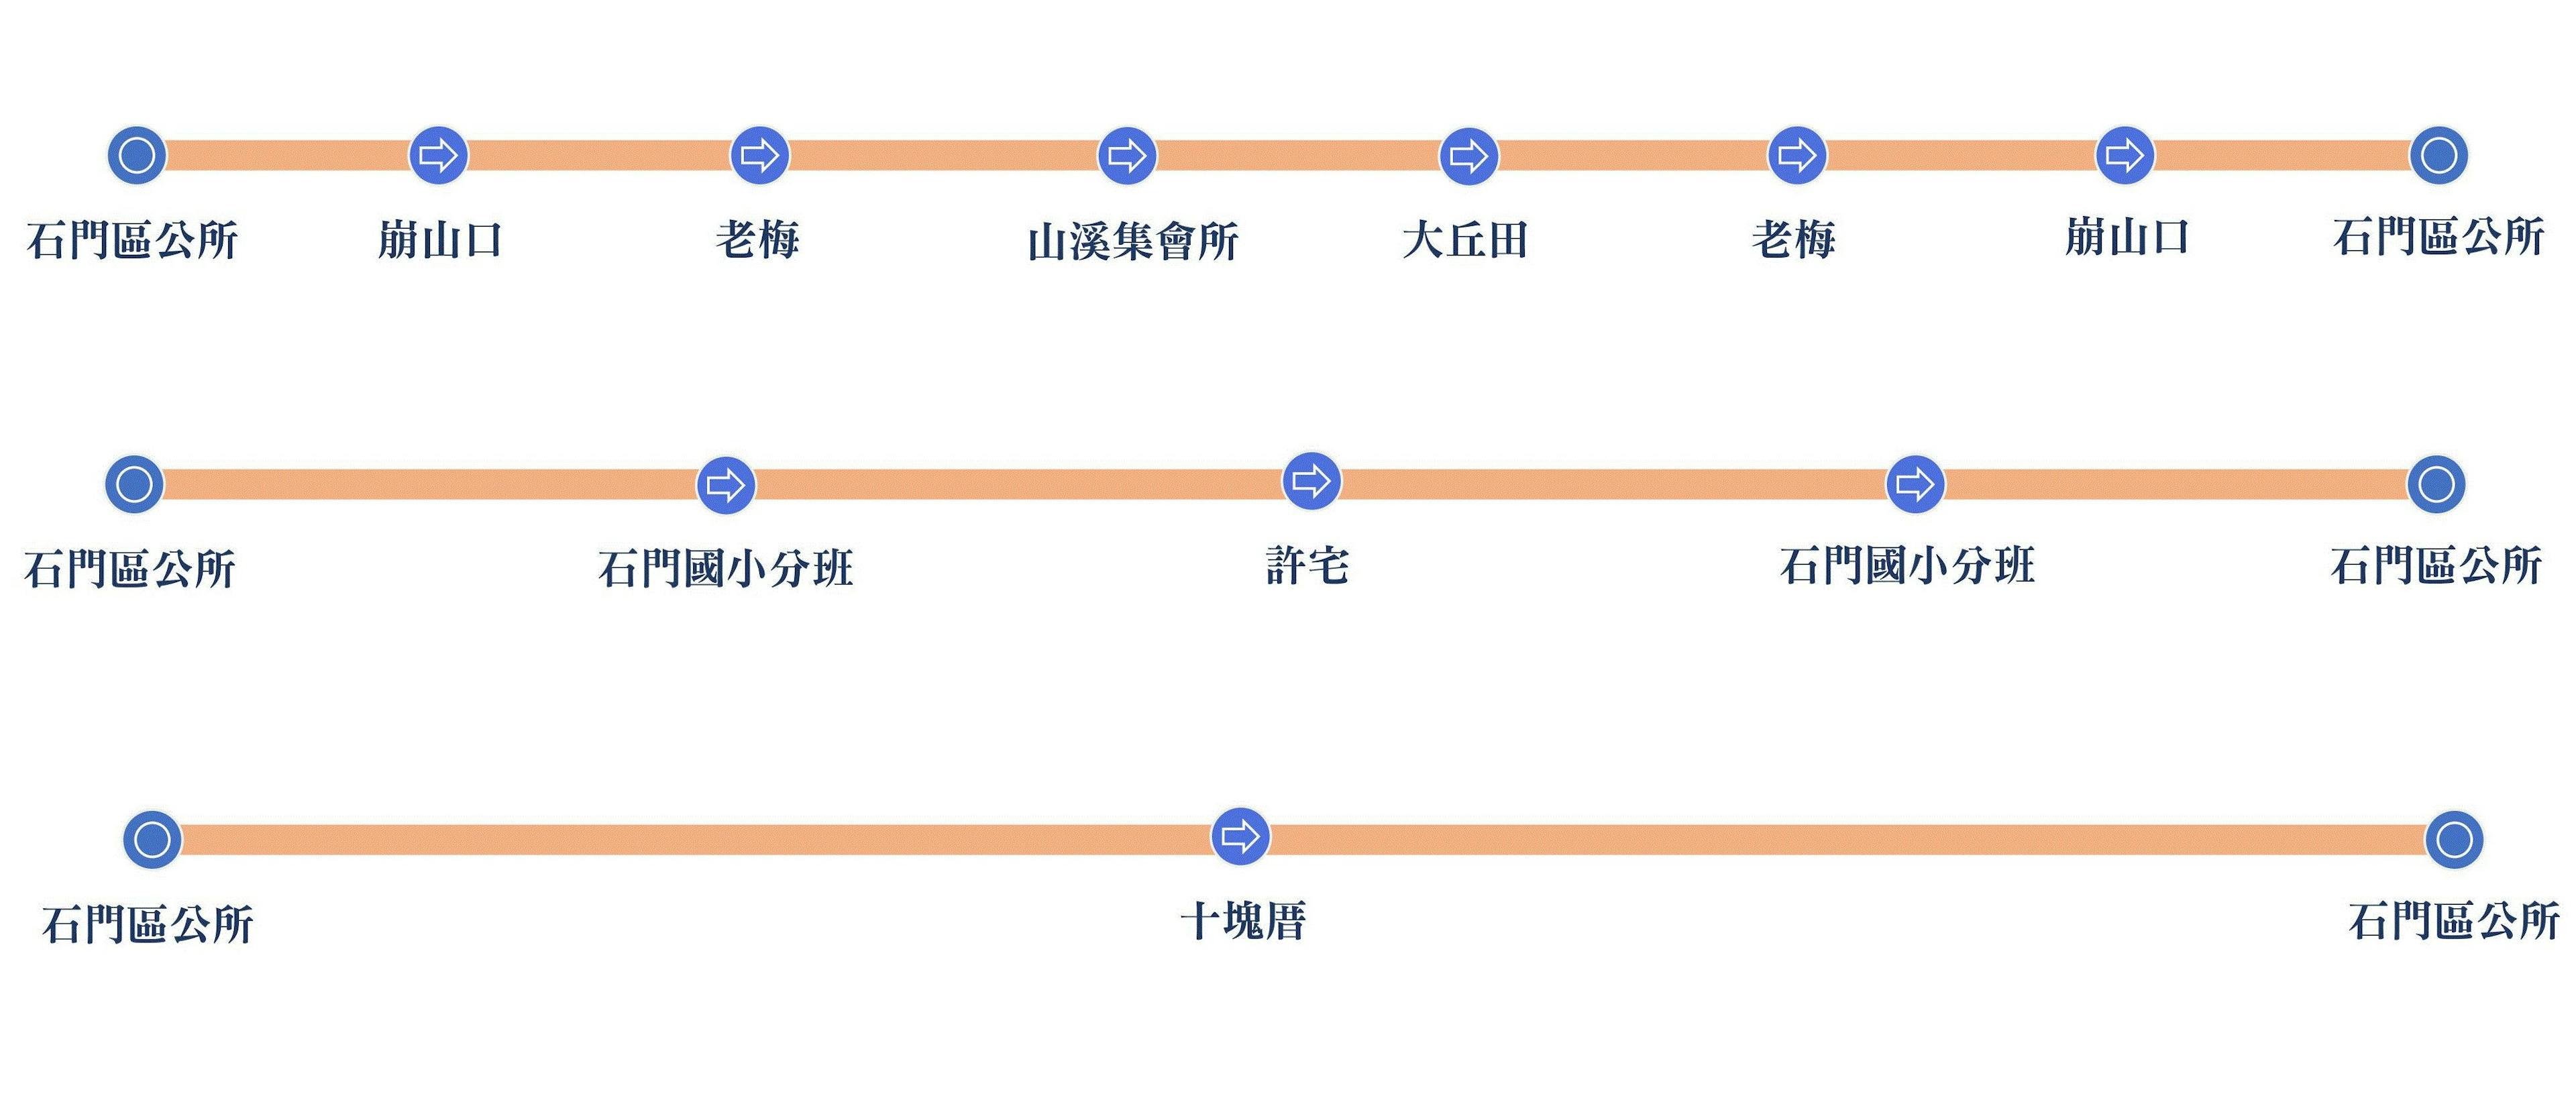 F151-1625Route Map-新北市 Bus